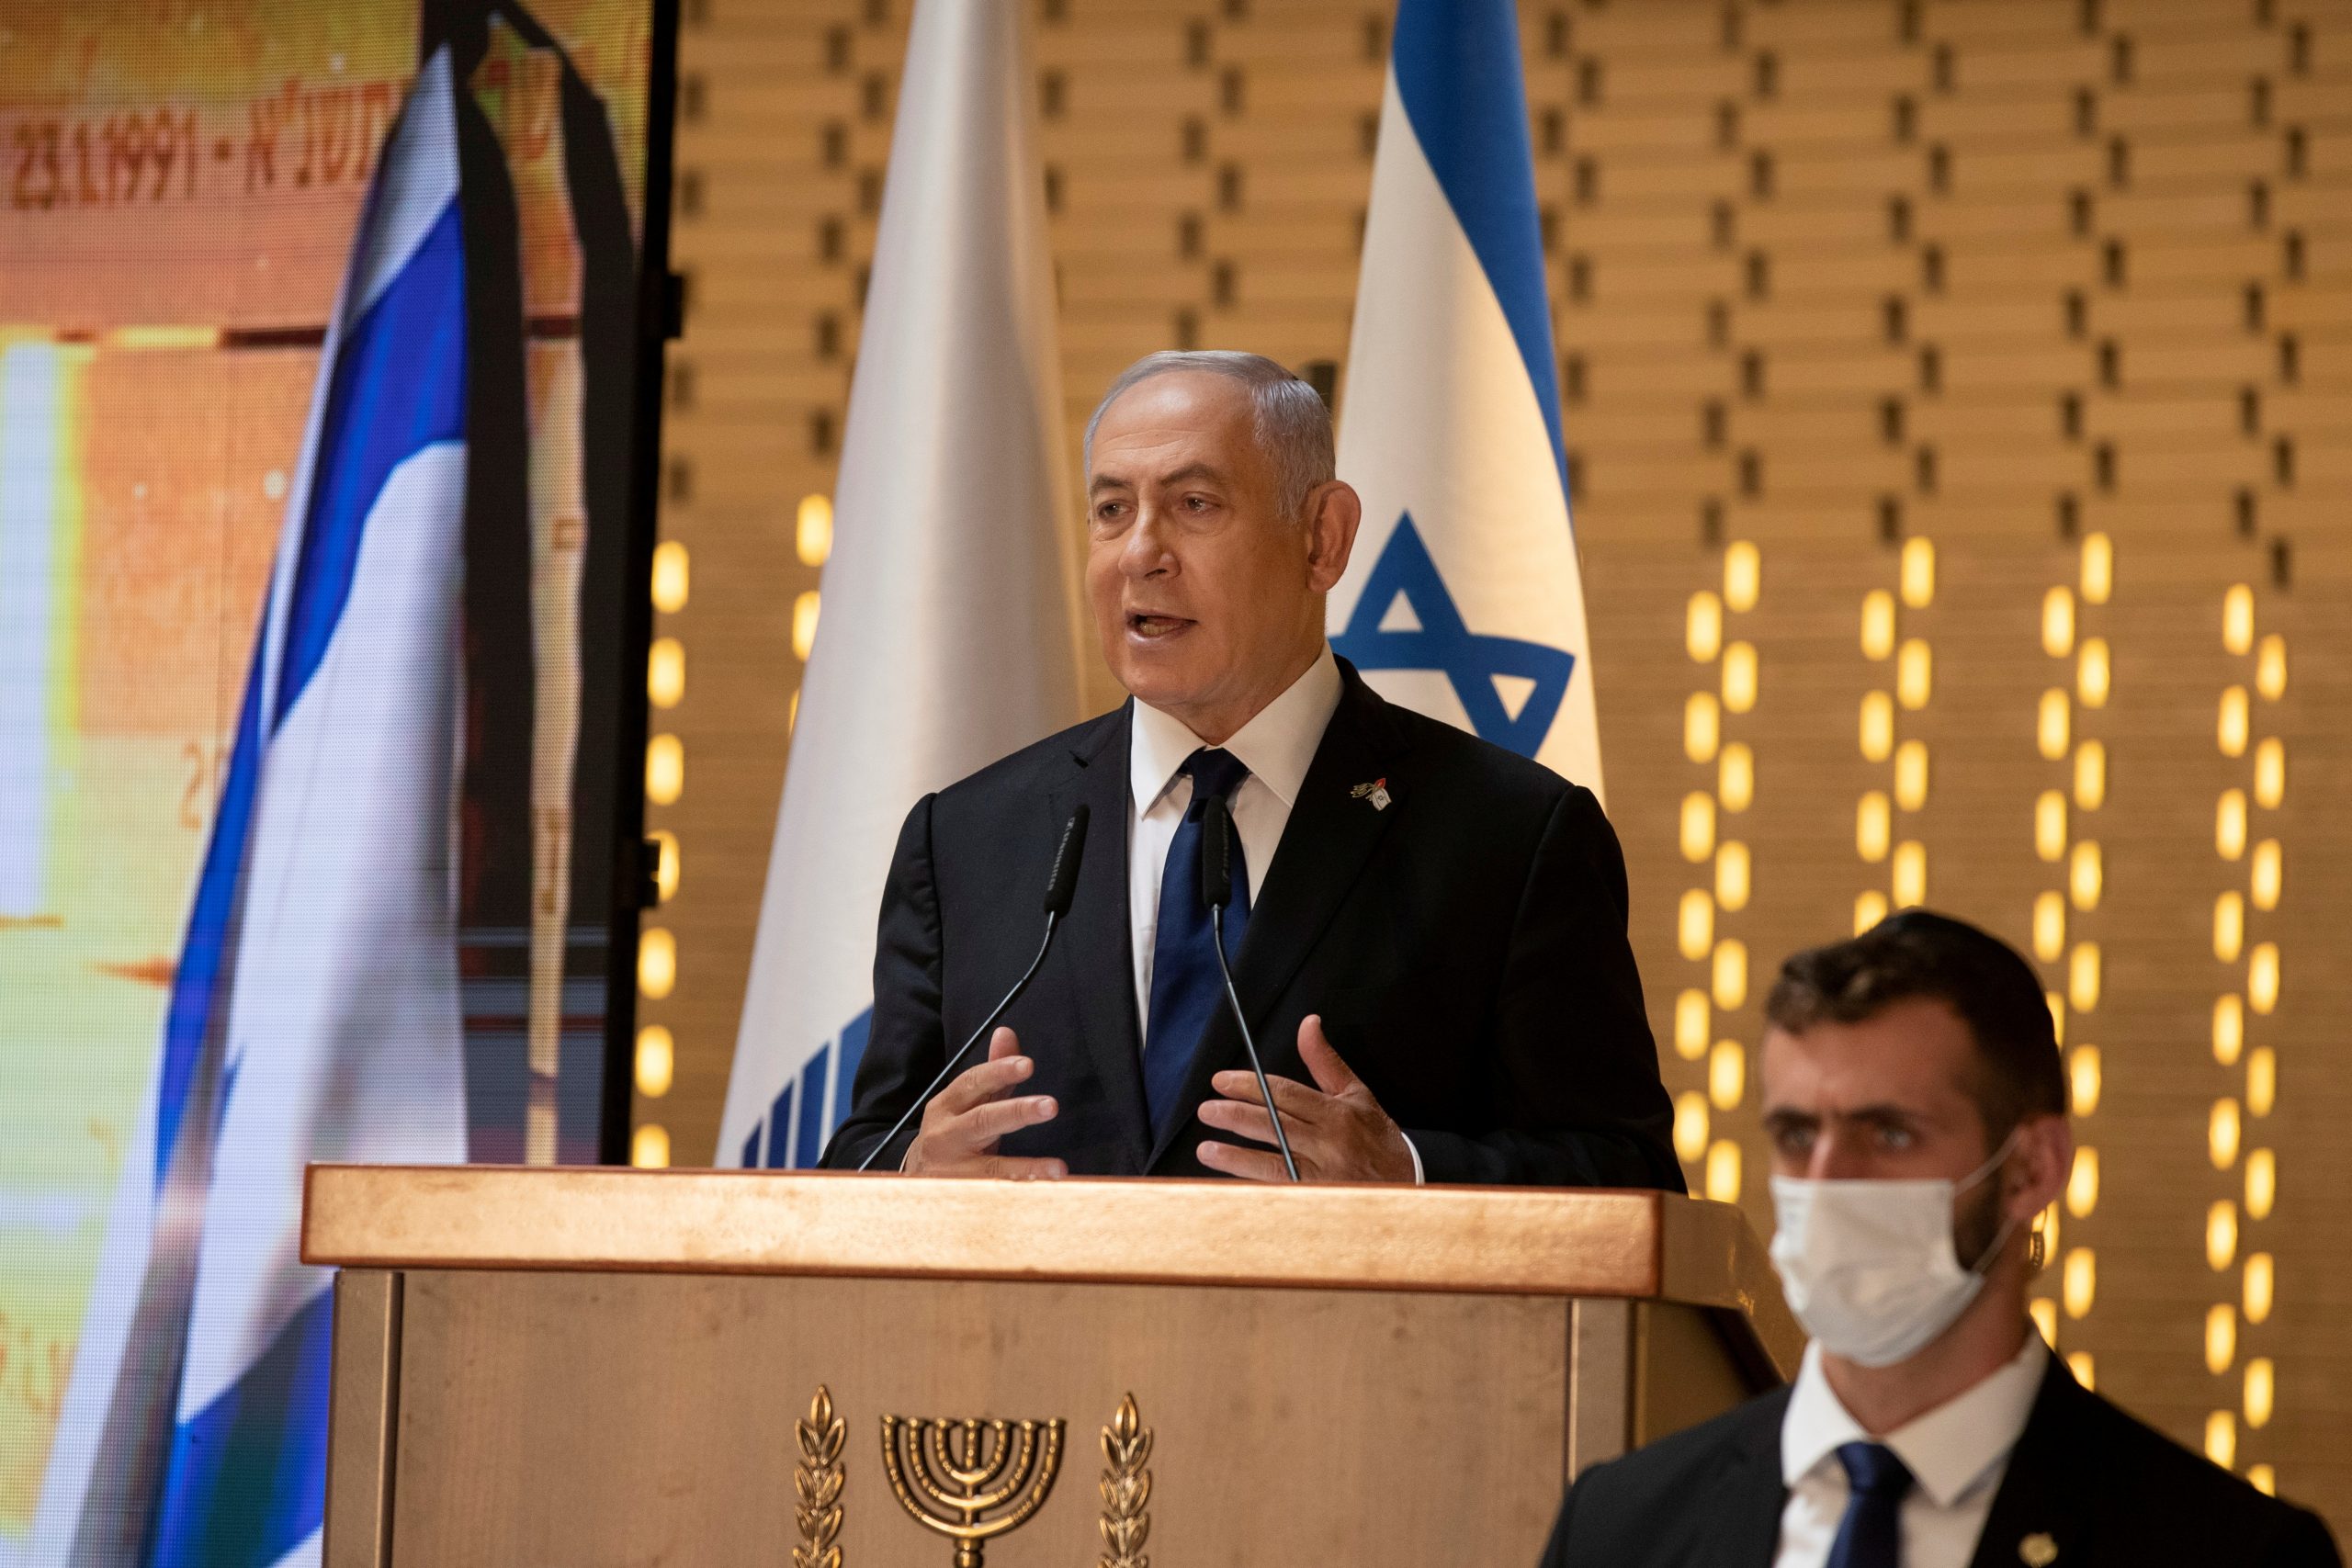  End of Netanyahu era could be in the cards in Israeli political drama